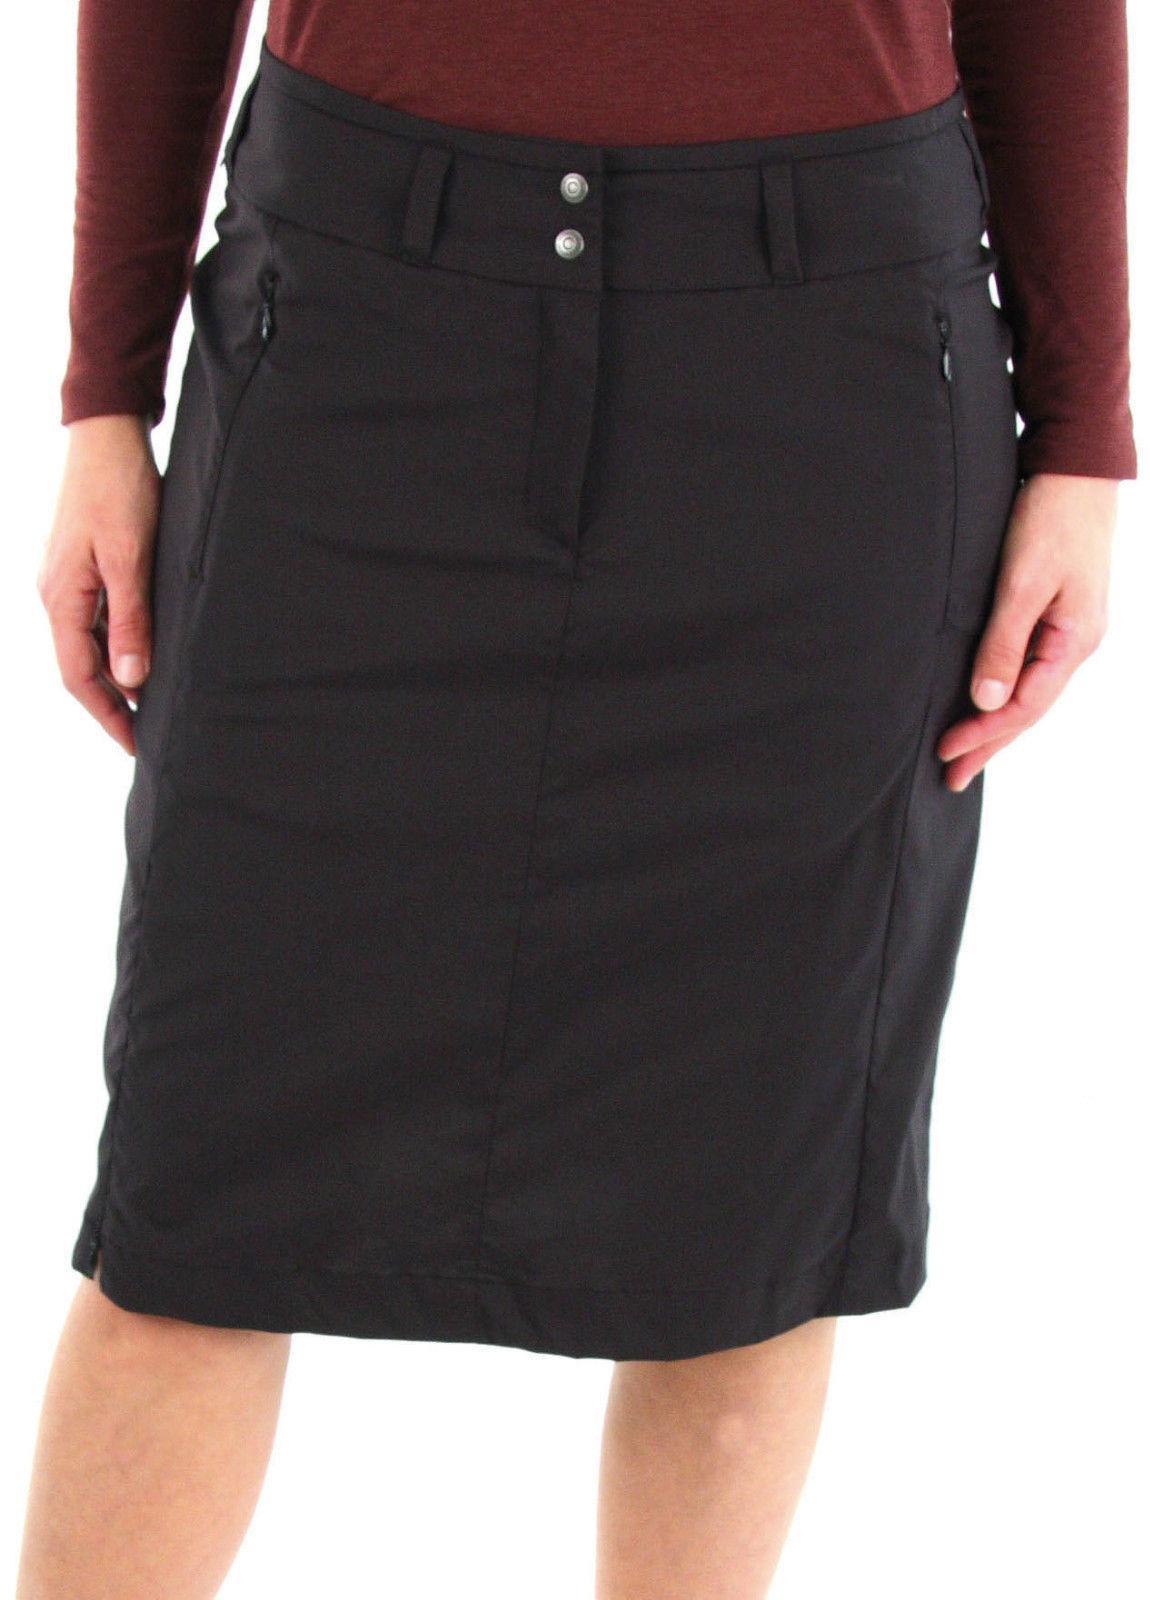 ExOfficio Outlier Skirt Meander Bend Travel Casual Outback Soft 2062-5124 - Black - 18